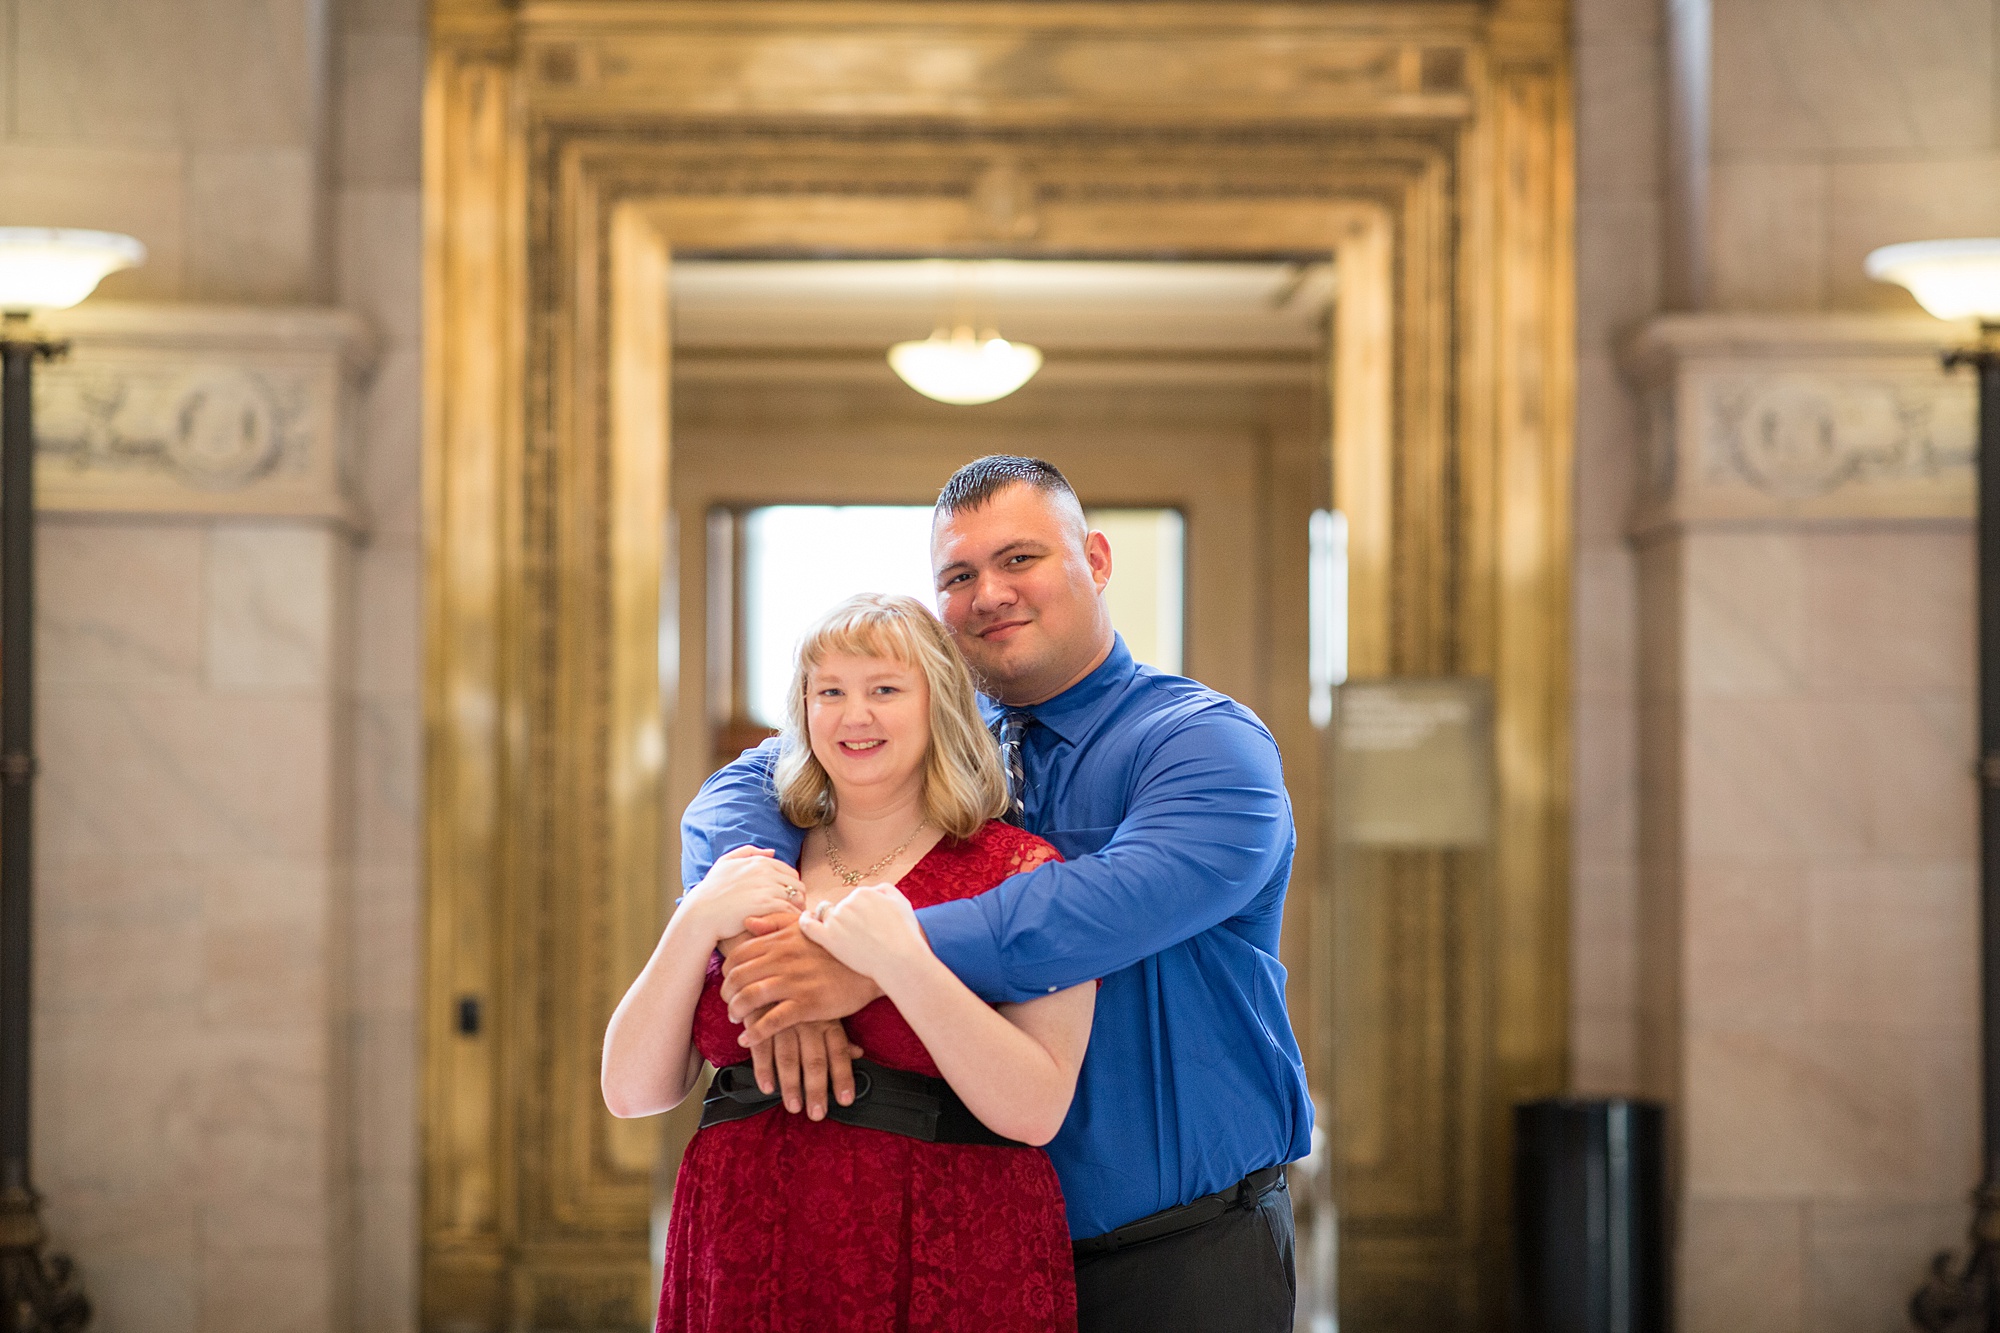 groom hugs bride from behind during engagement photos in library